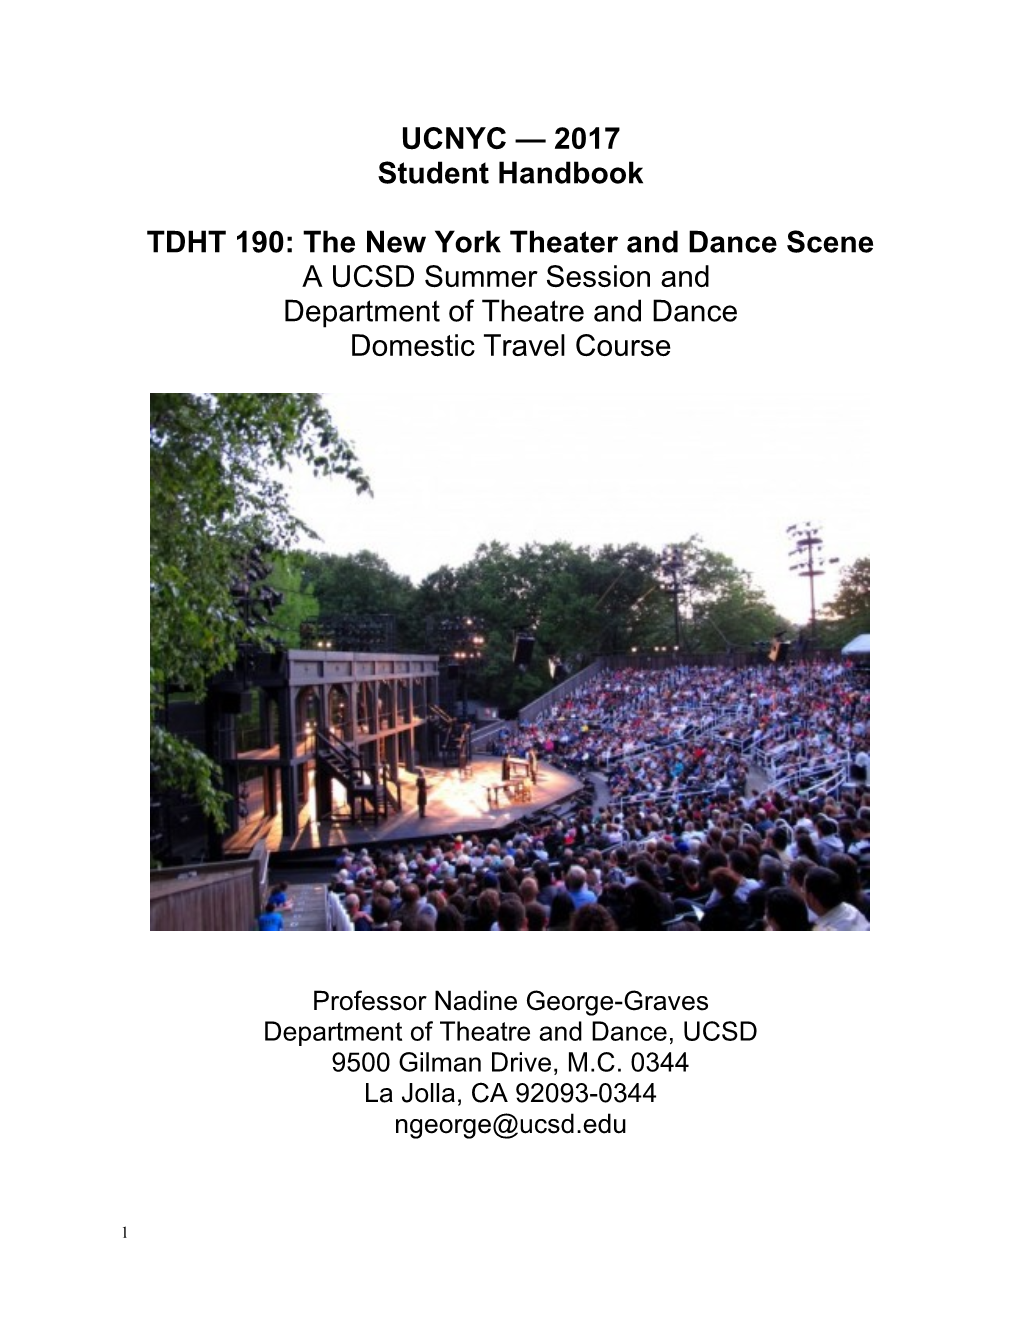 TDHT 190: the New York Theater and Dance Scene